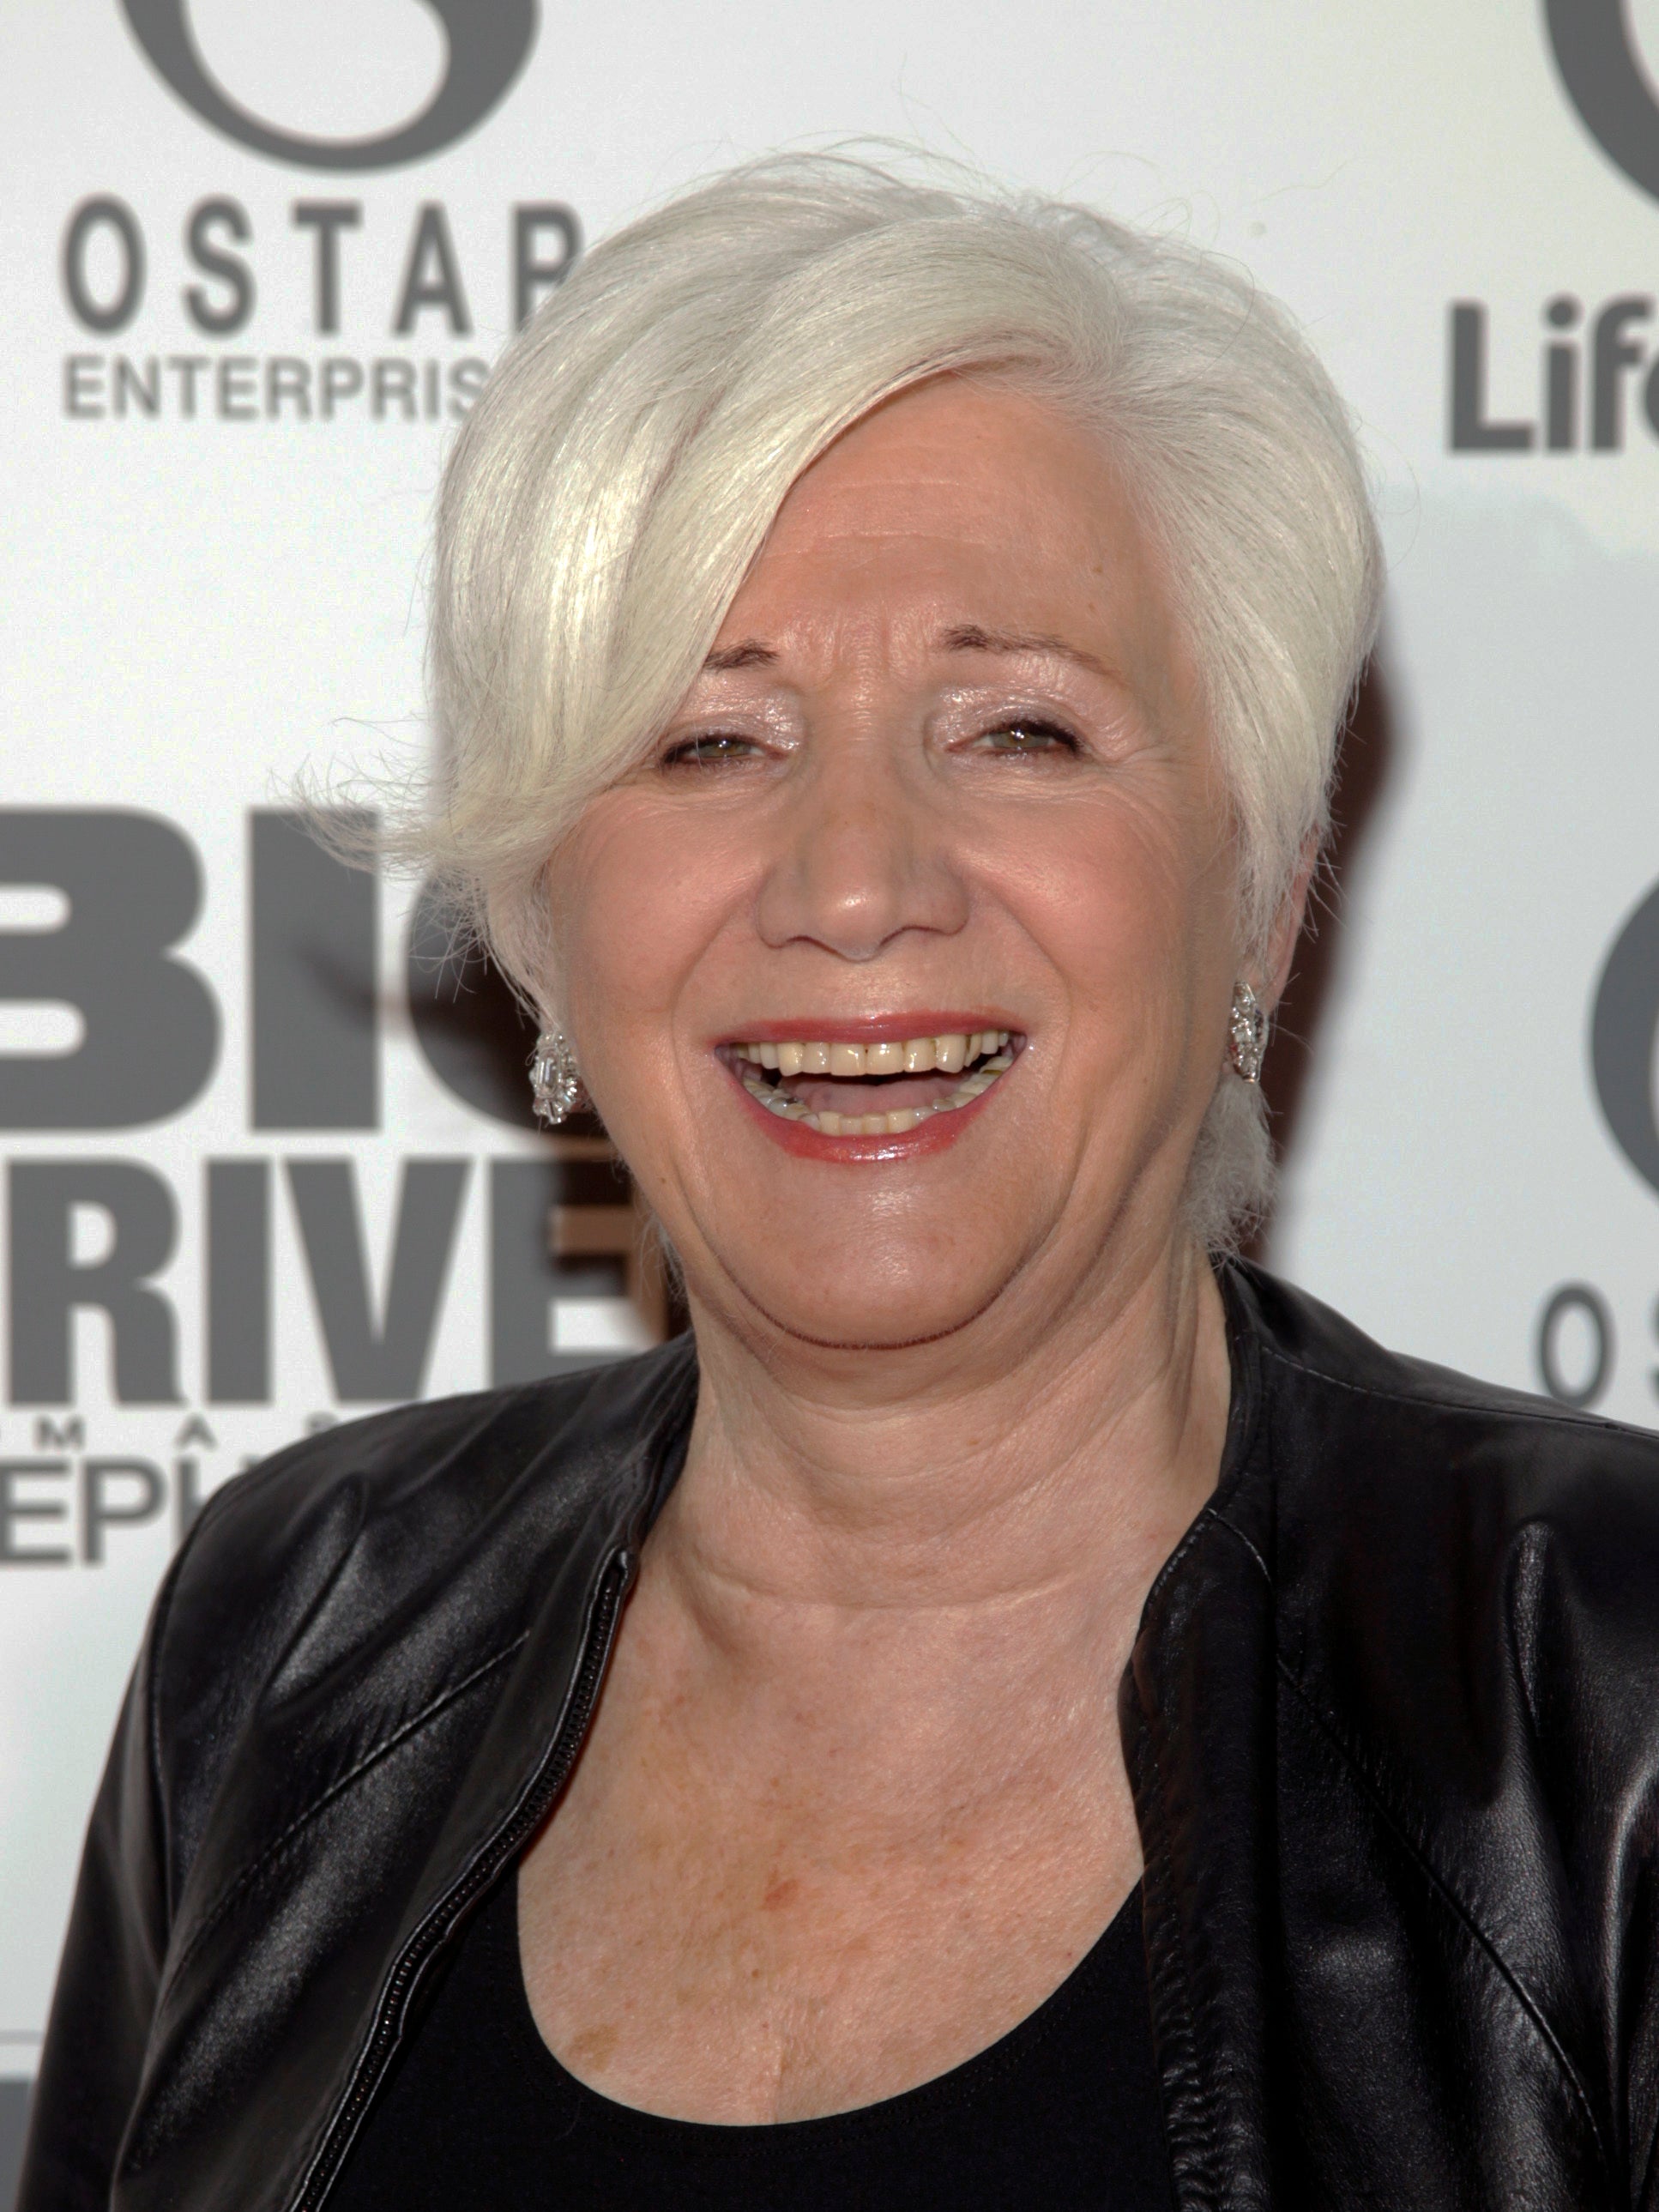 Olympia Dukakis, pictured in 2014. She has died aged 89.